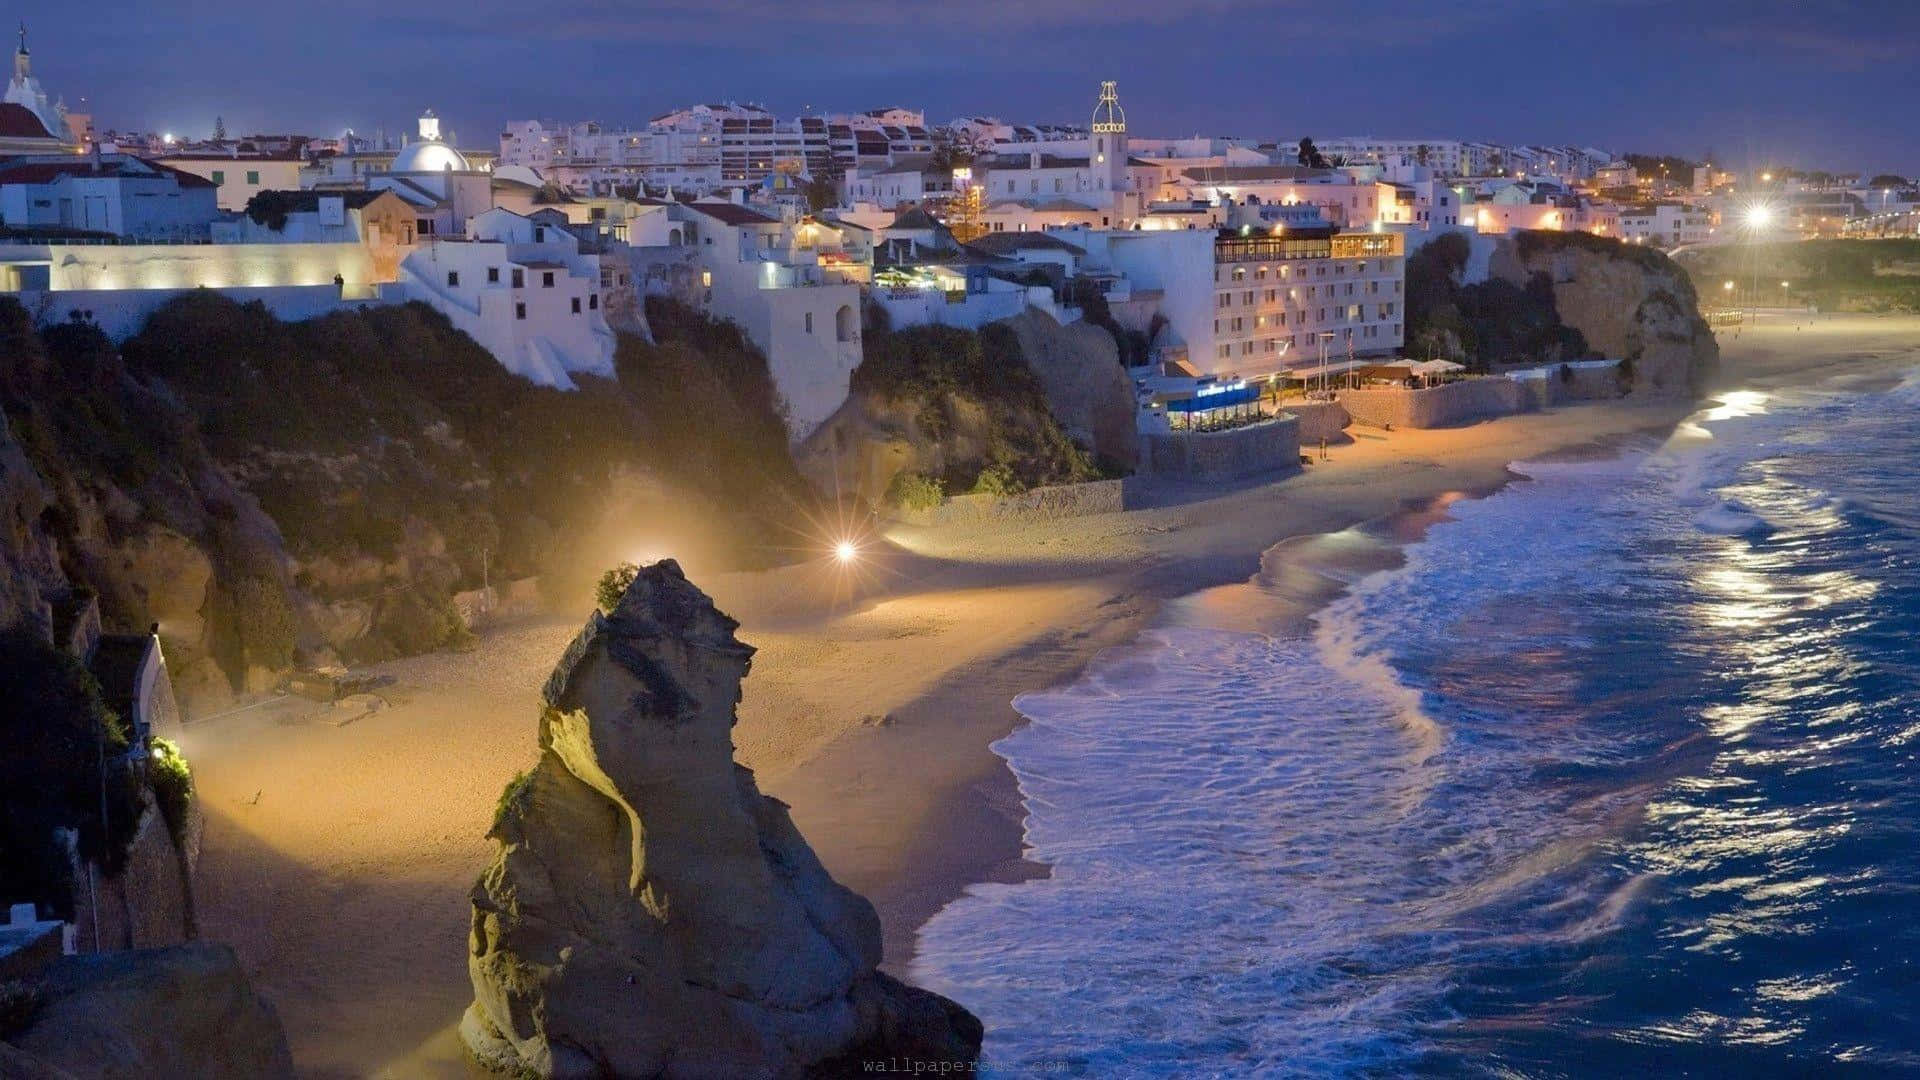 A City At Night With A Cliff And Ocean